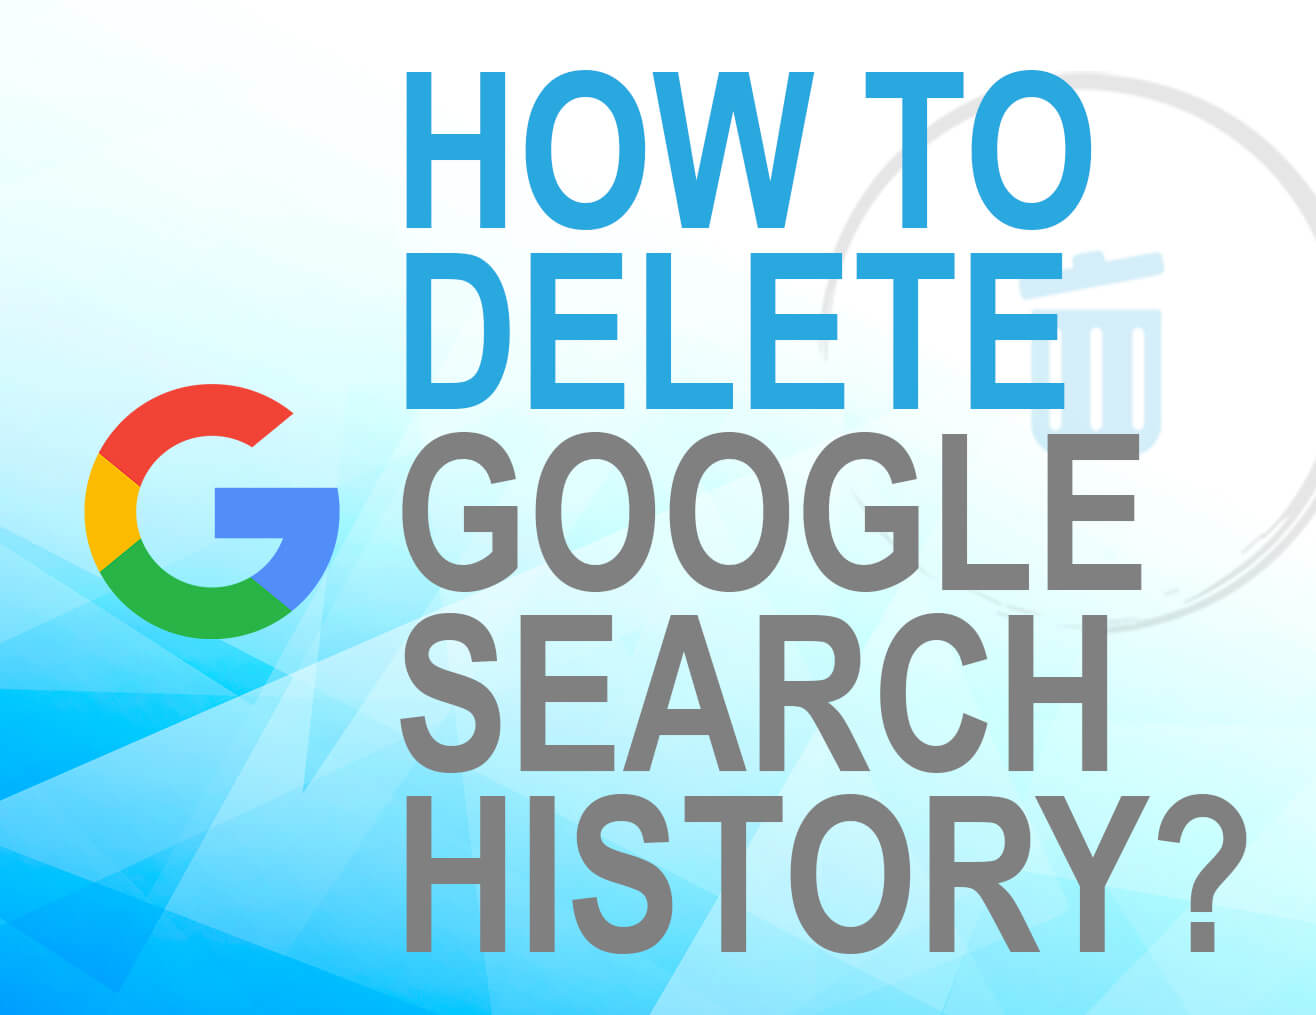 How to delete Google search history?